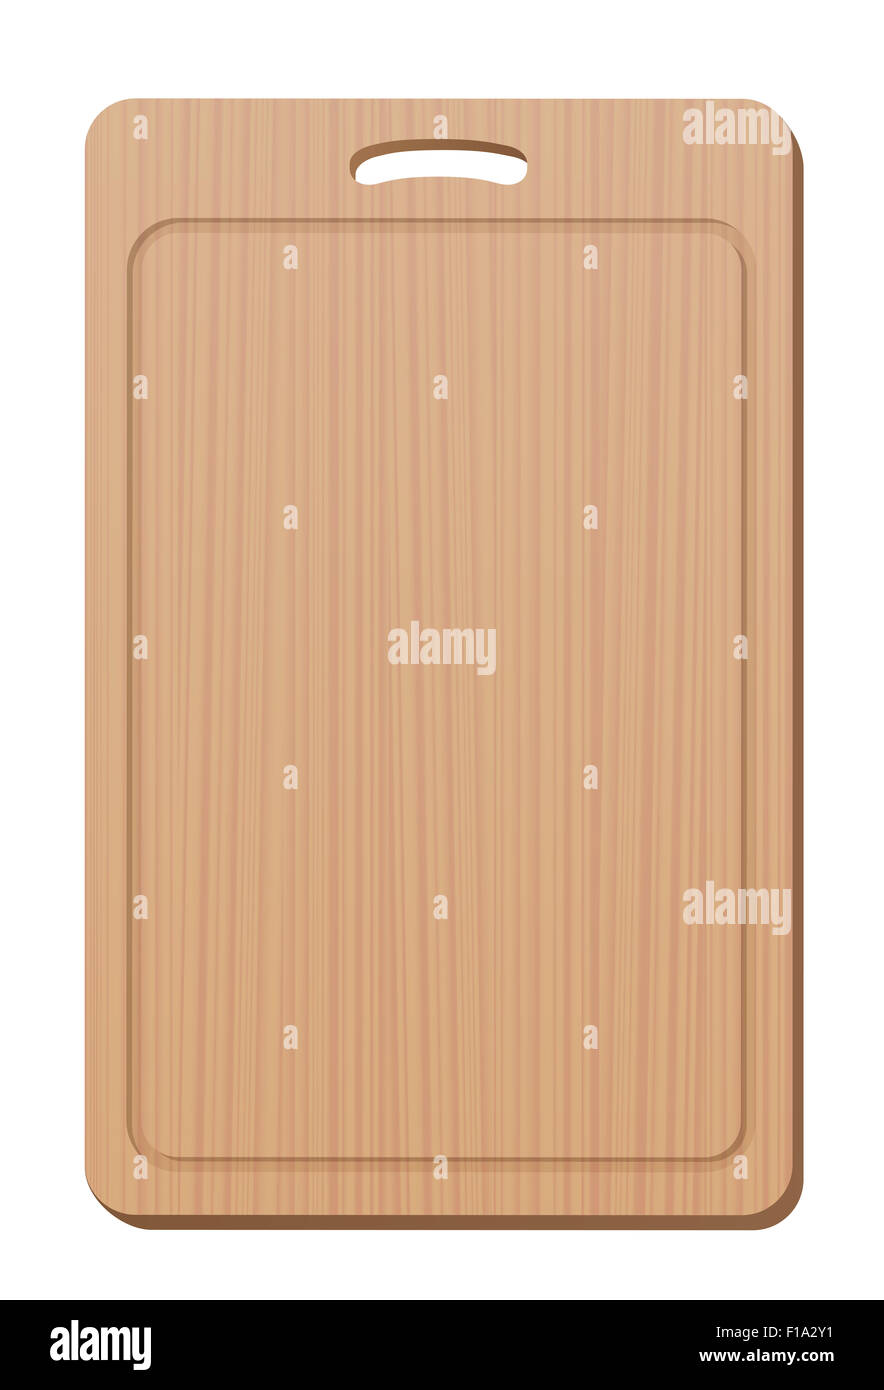 Wooden cutting board with grip - blank, simple, upright. Illustration over white background. Stock Photo